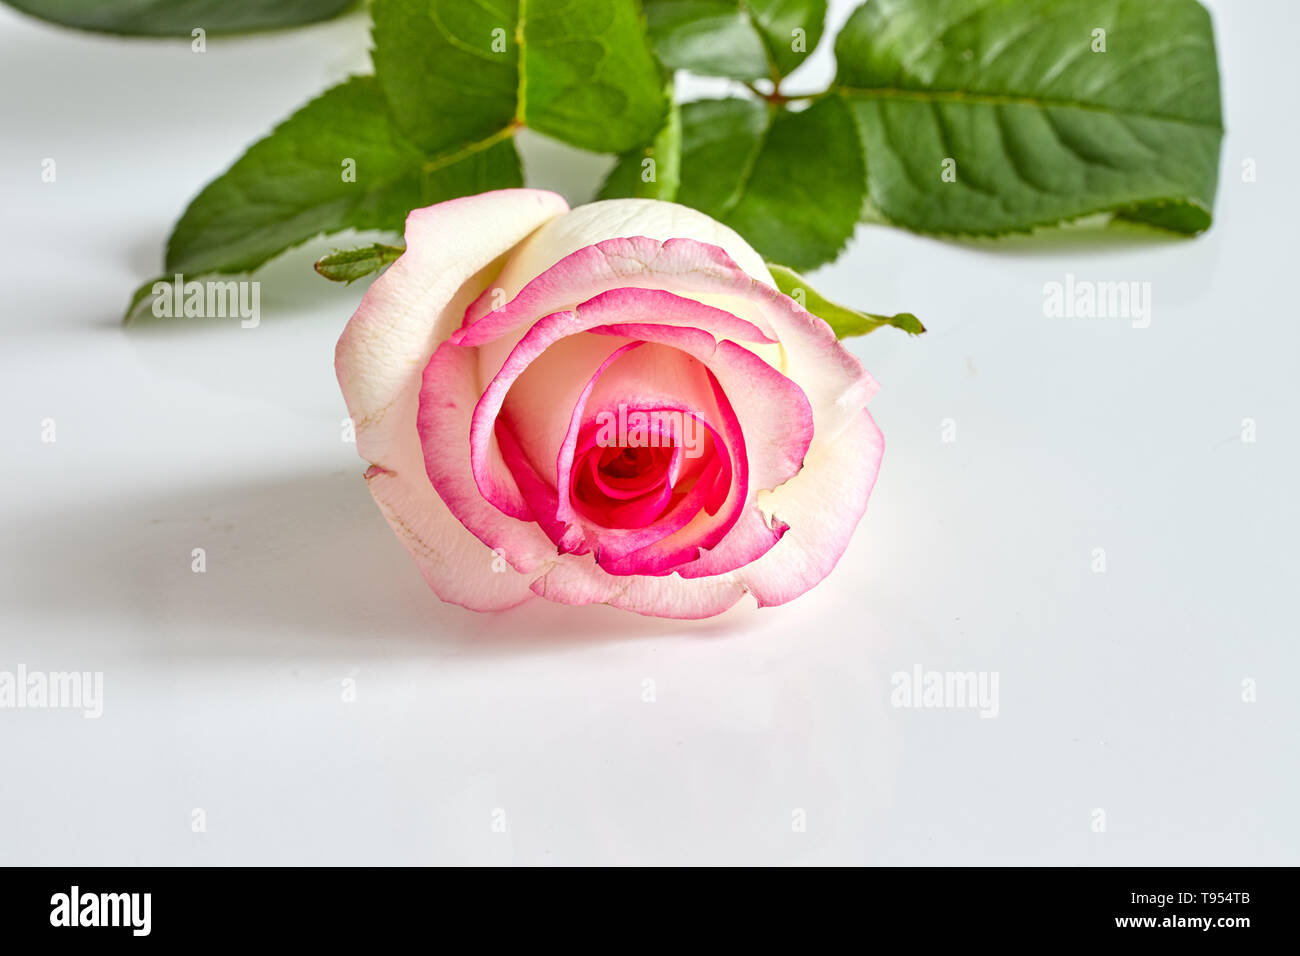 Delicate white and pink flowers heaped together · Free Stock Photo